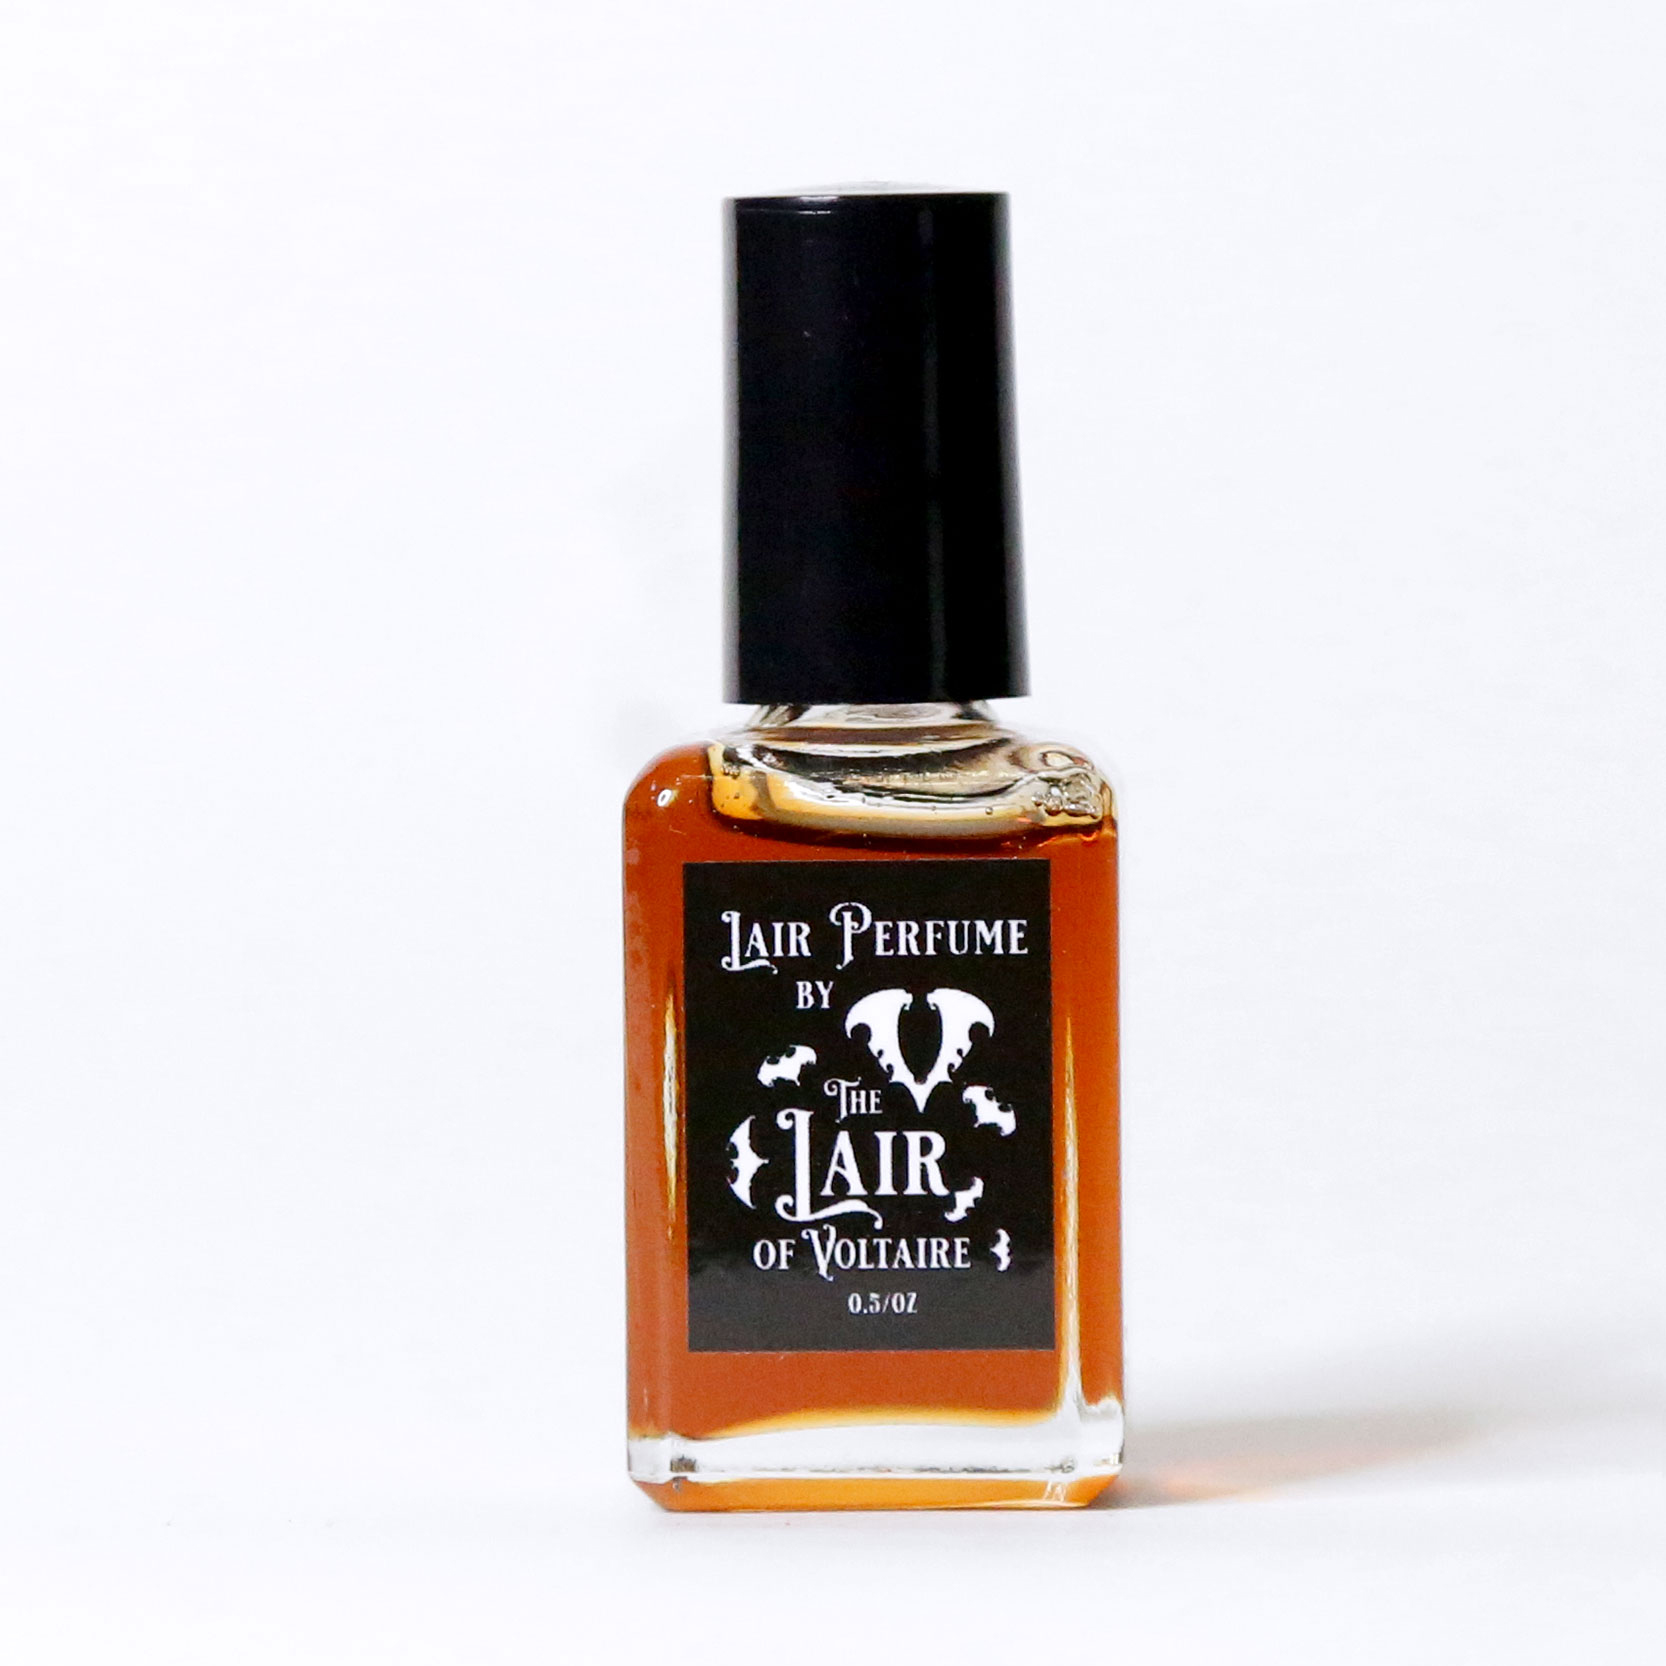 Lair Perfume by The Lair of Voltaire (USA Shipments Only)